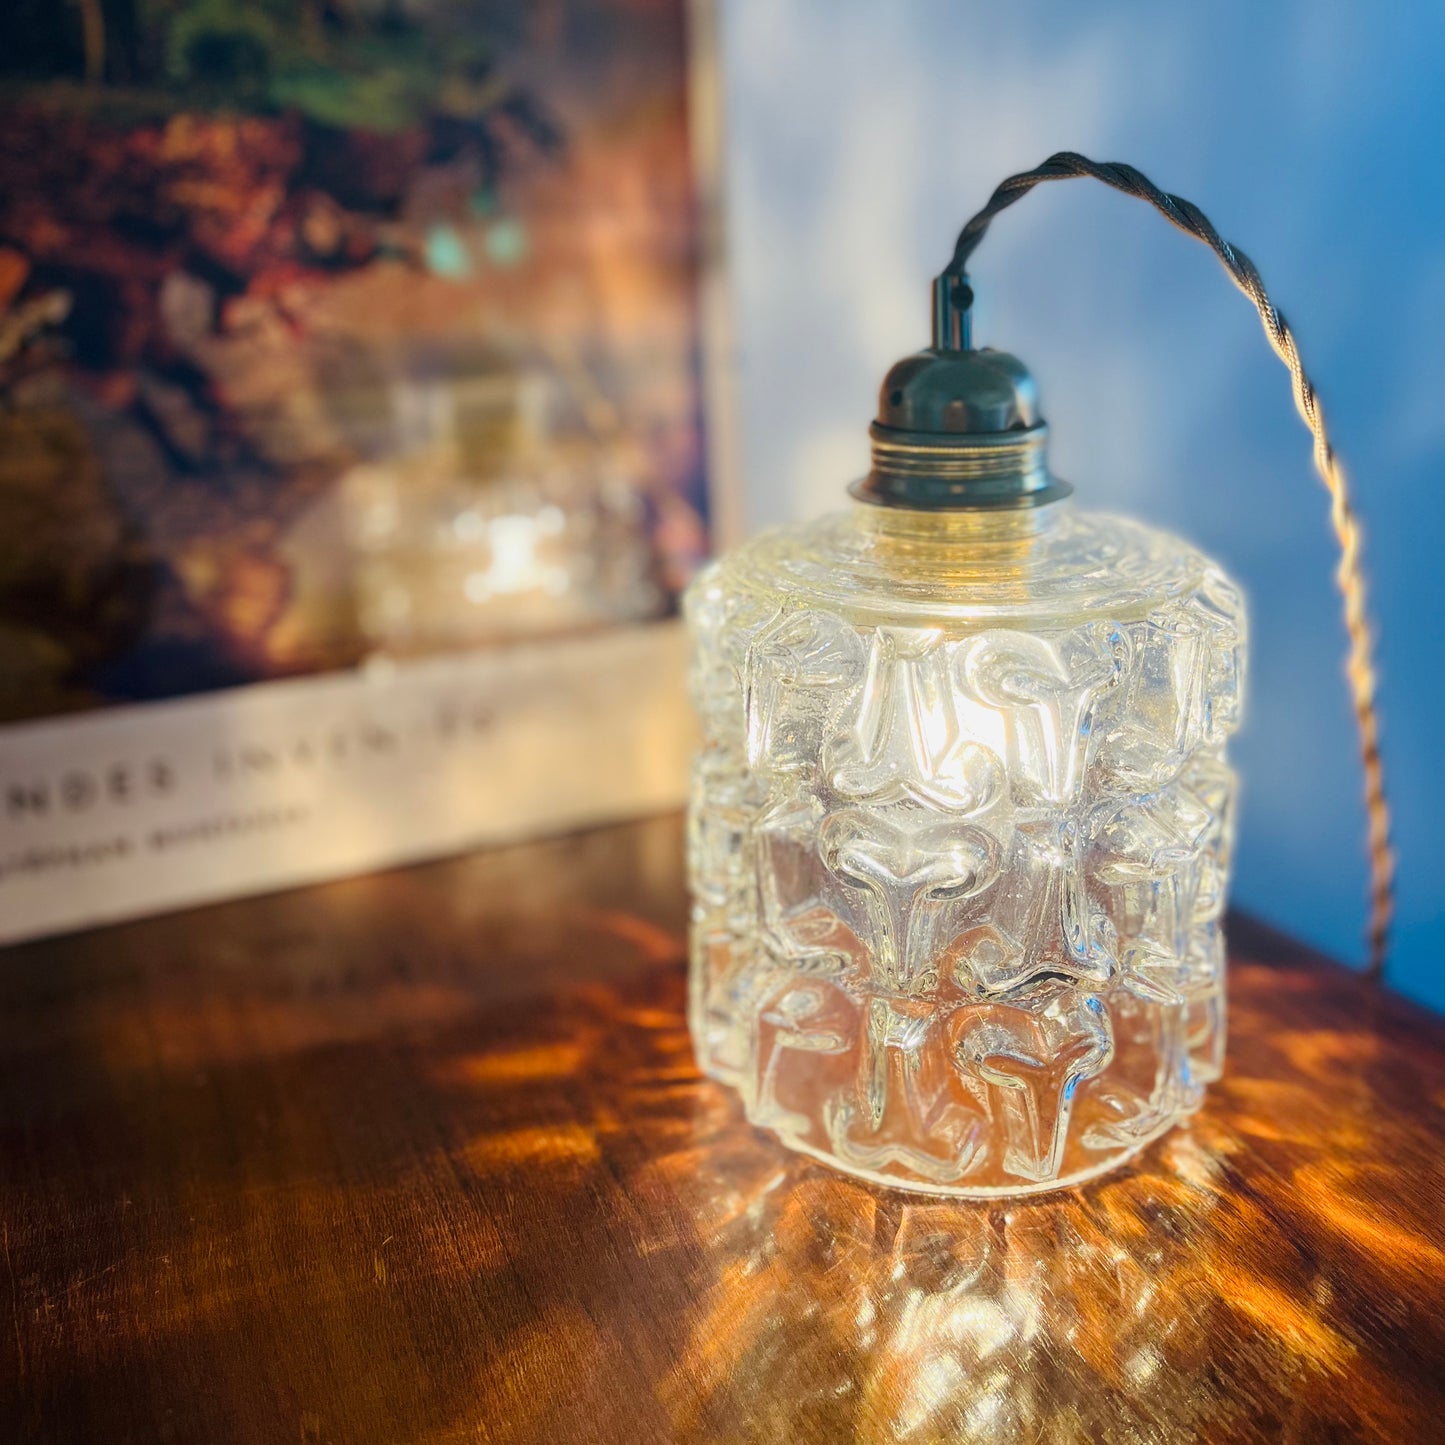 Upcycled portable lamp in facetted glass